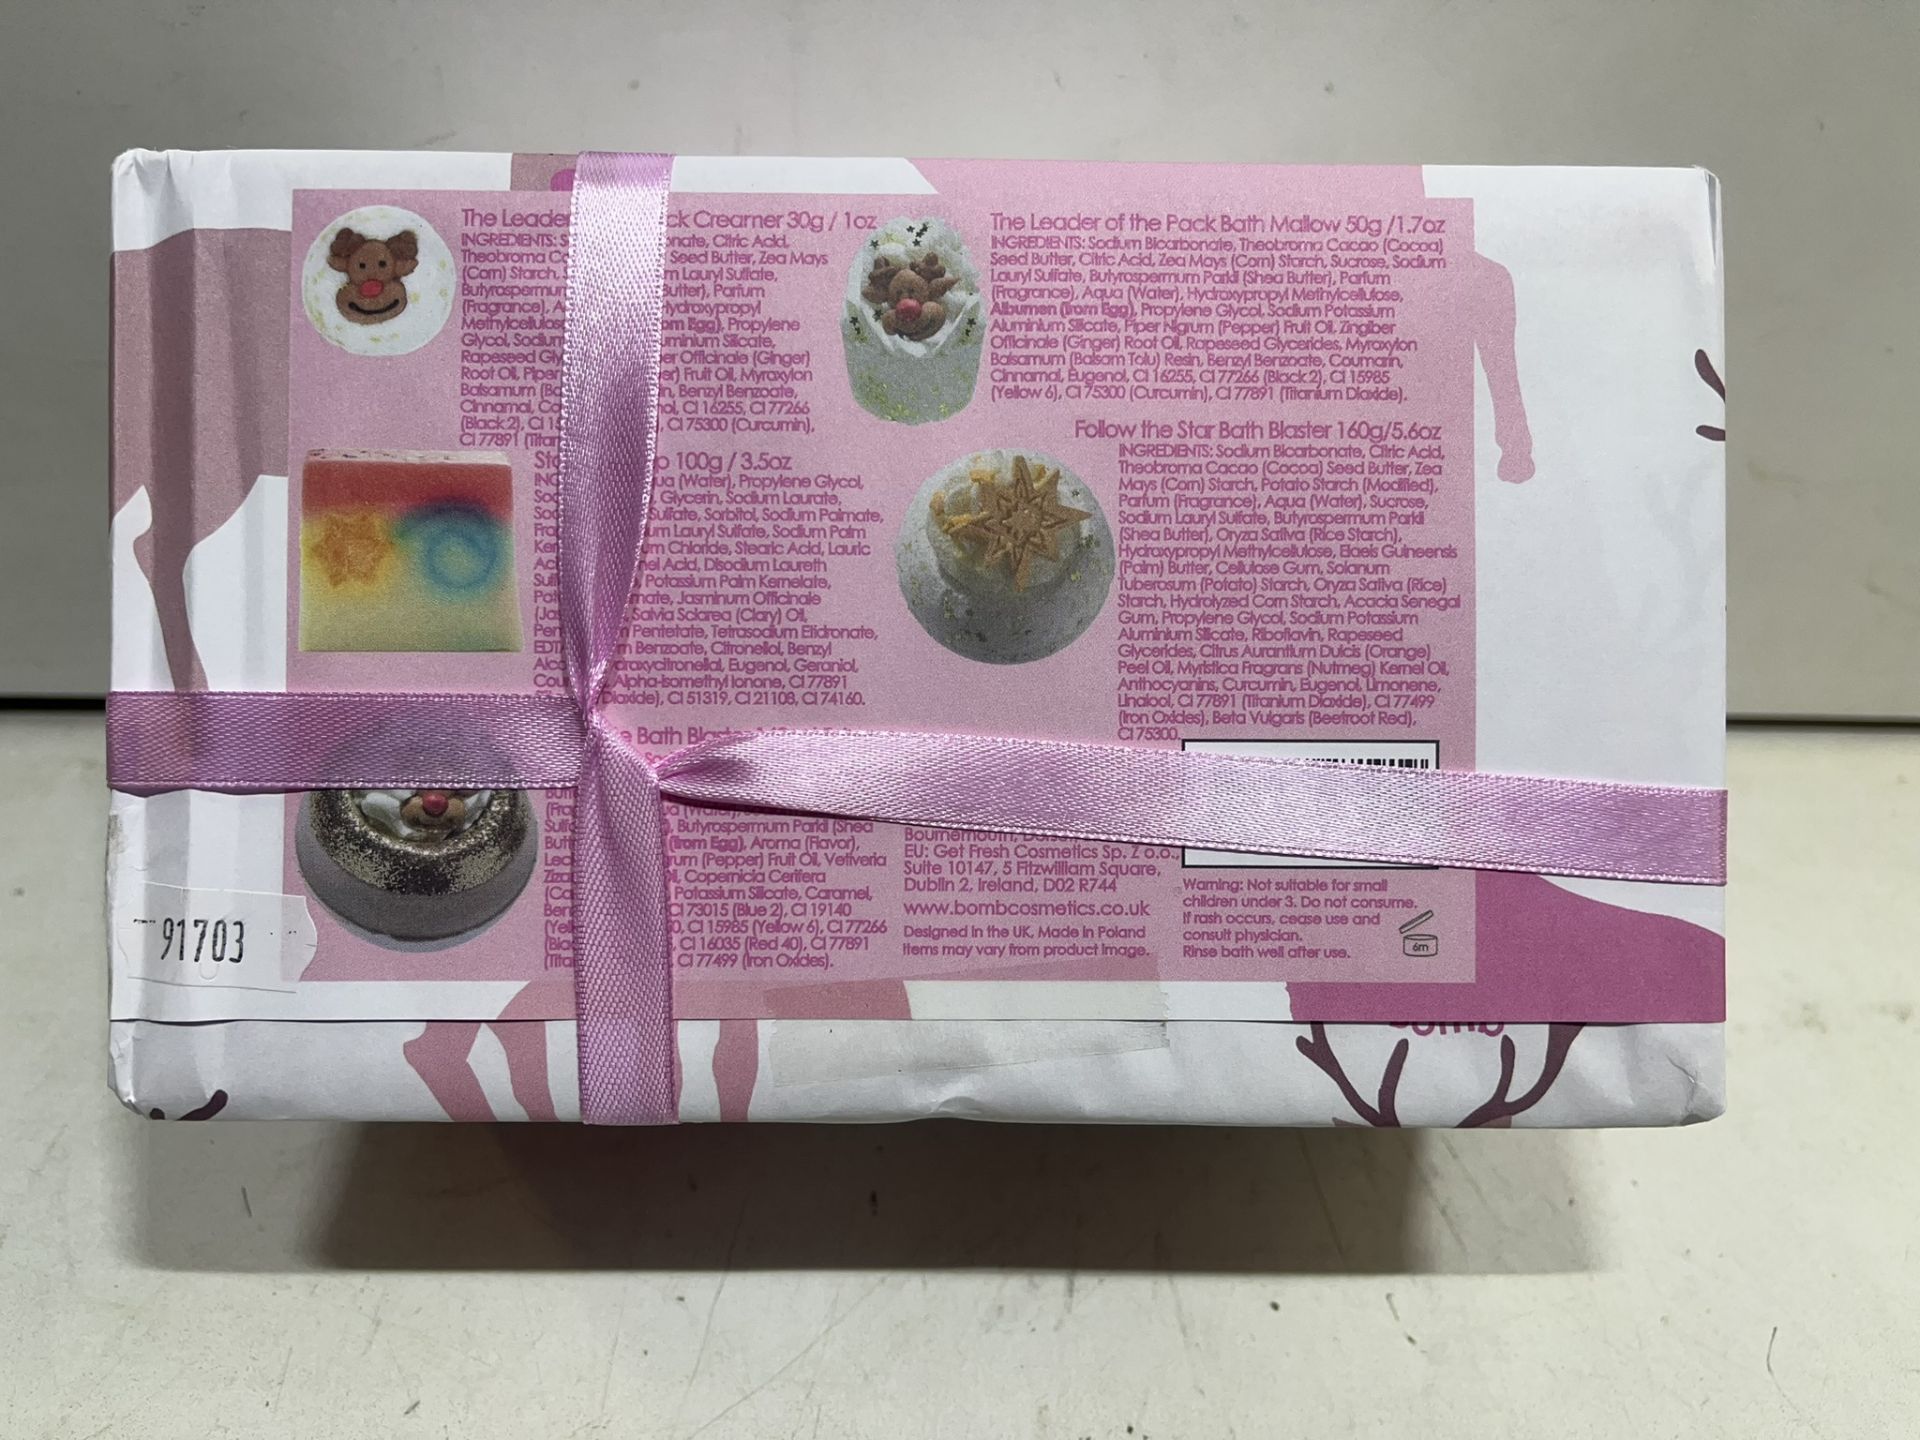 36 x Boxes Of Bomb Cosmetics Gift Wrapped Bath Bombs - Image 7 of 8